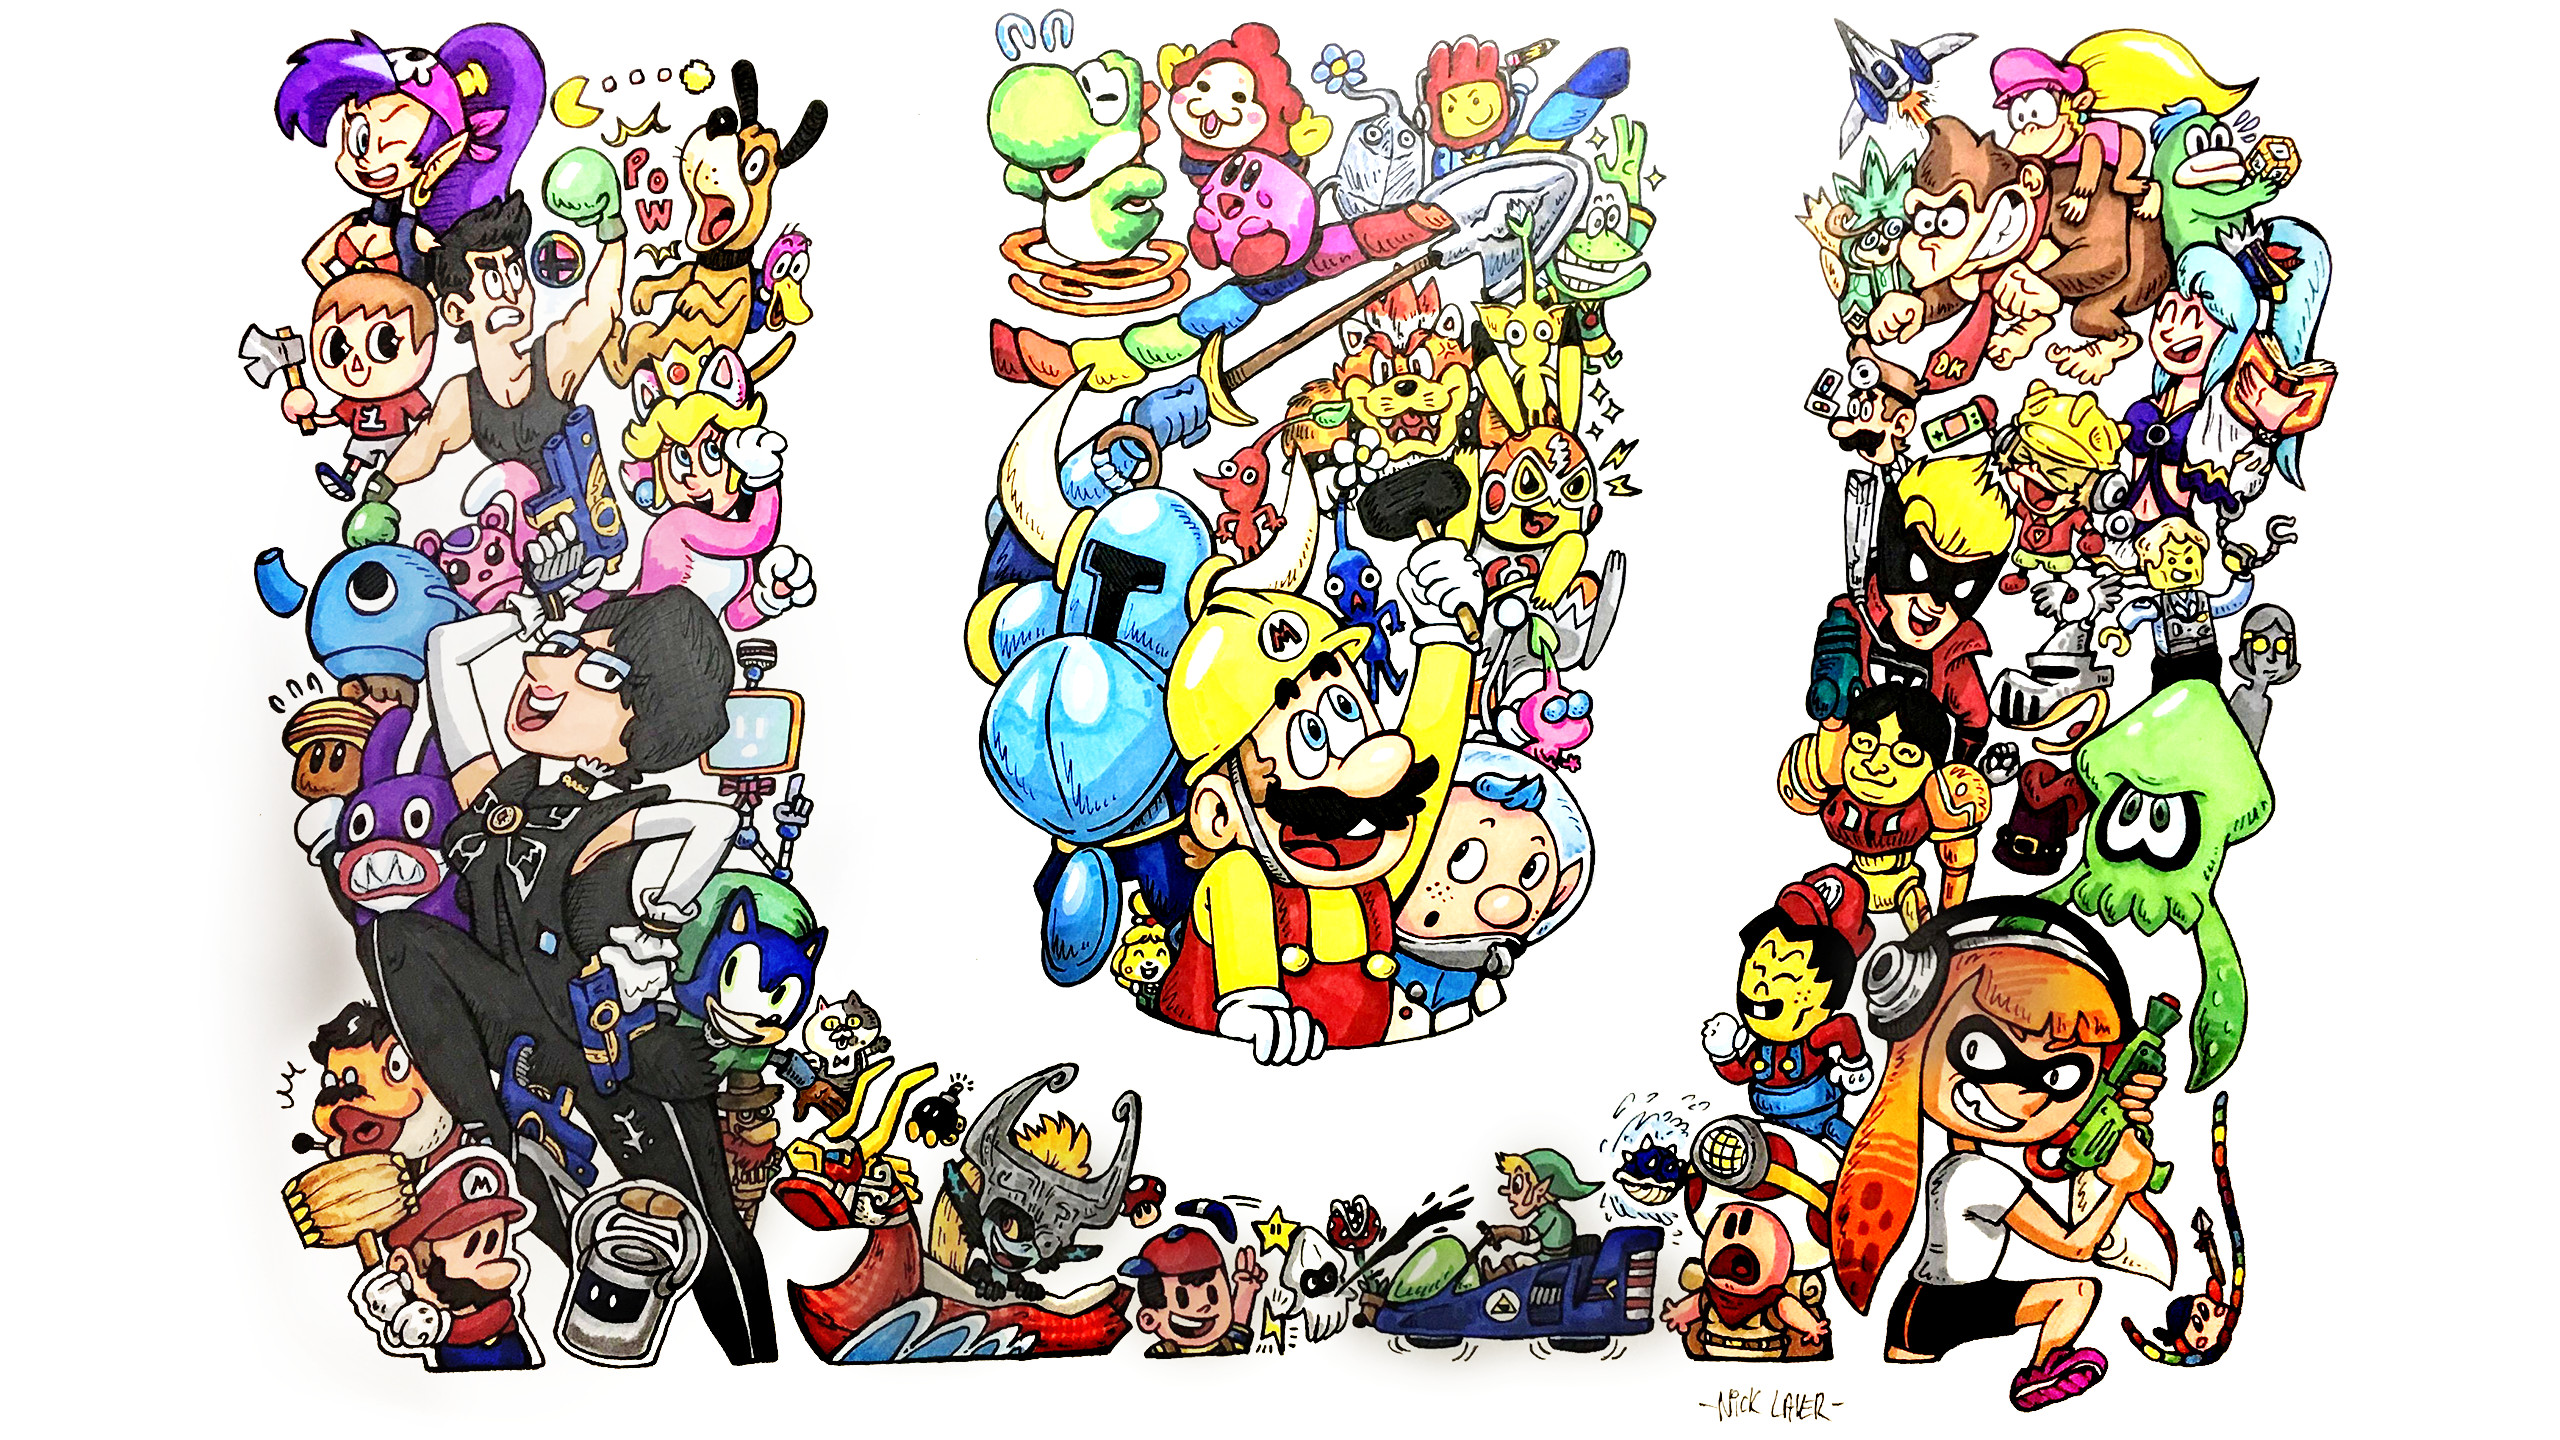 2560x1440 ImageI cleaned up plooper14's awesome Wii U tribute and made it into a  Wallpaper!